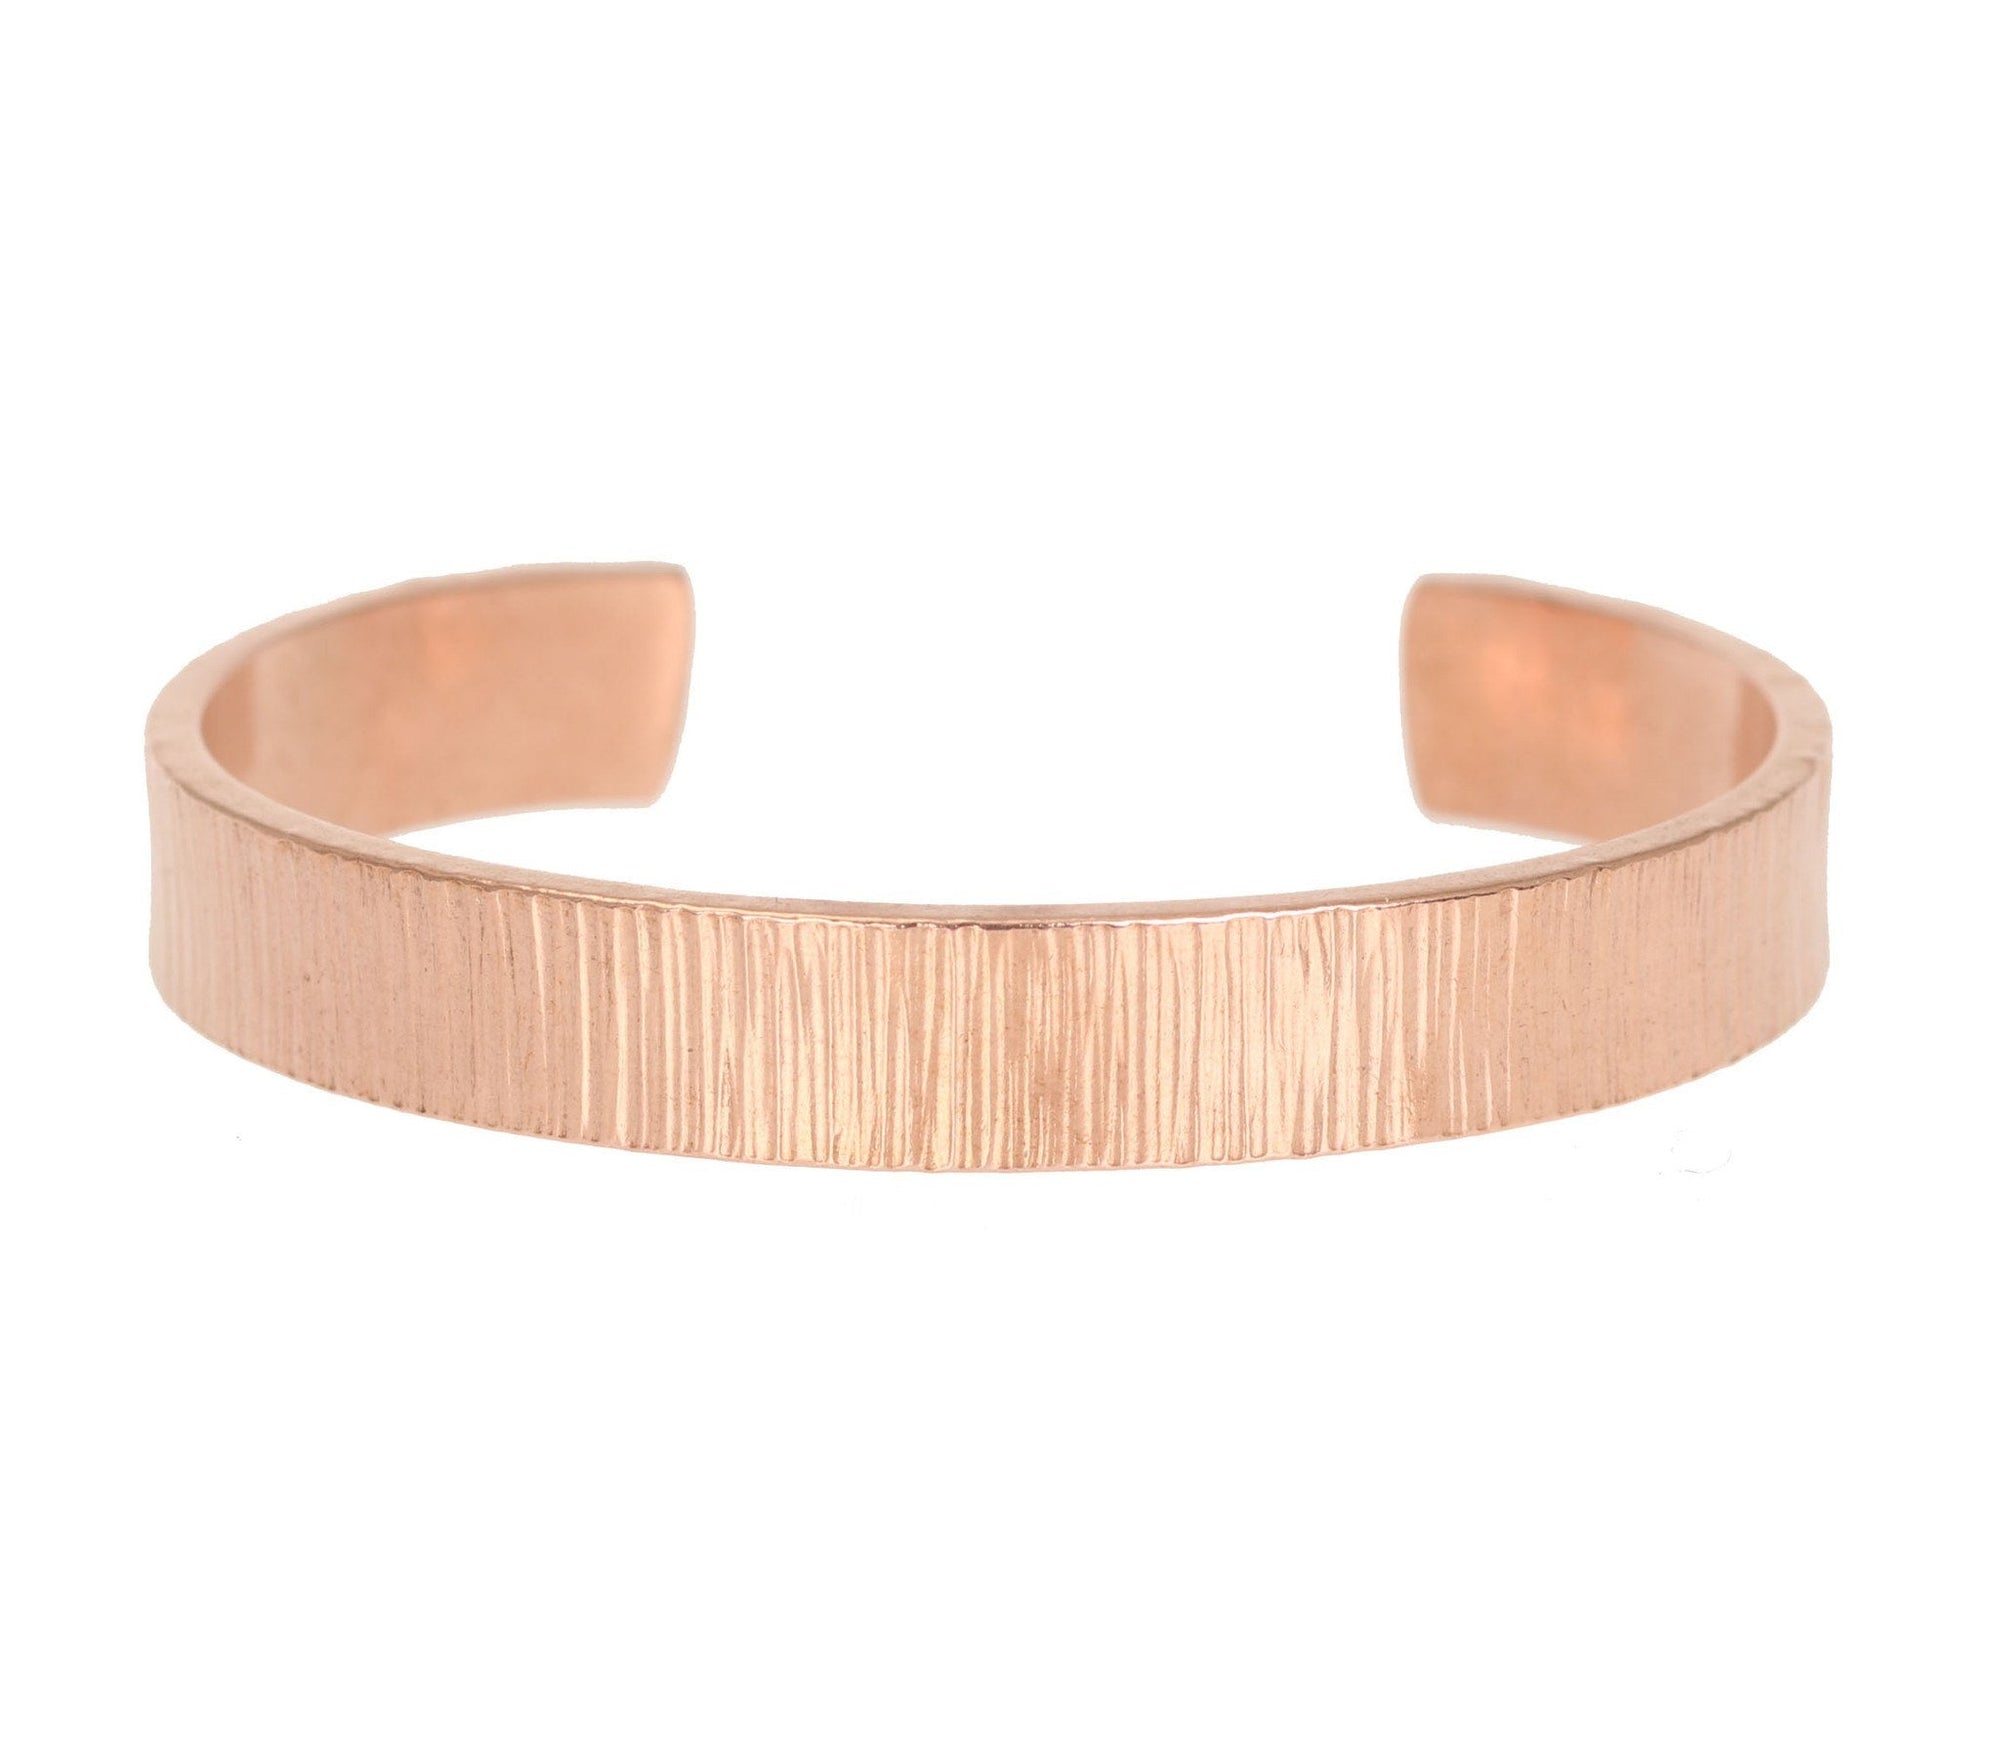 Side View of 10mm Wide Chased Copper Cuff Bracelet 